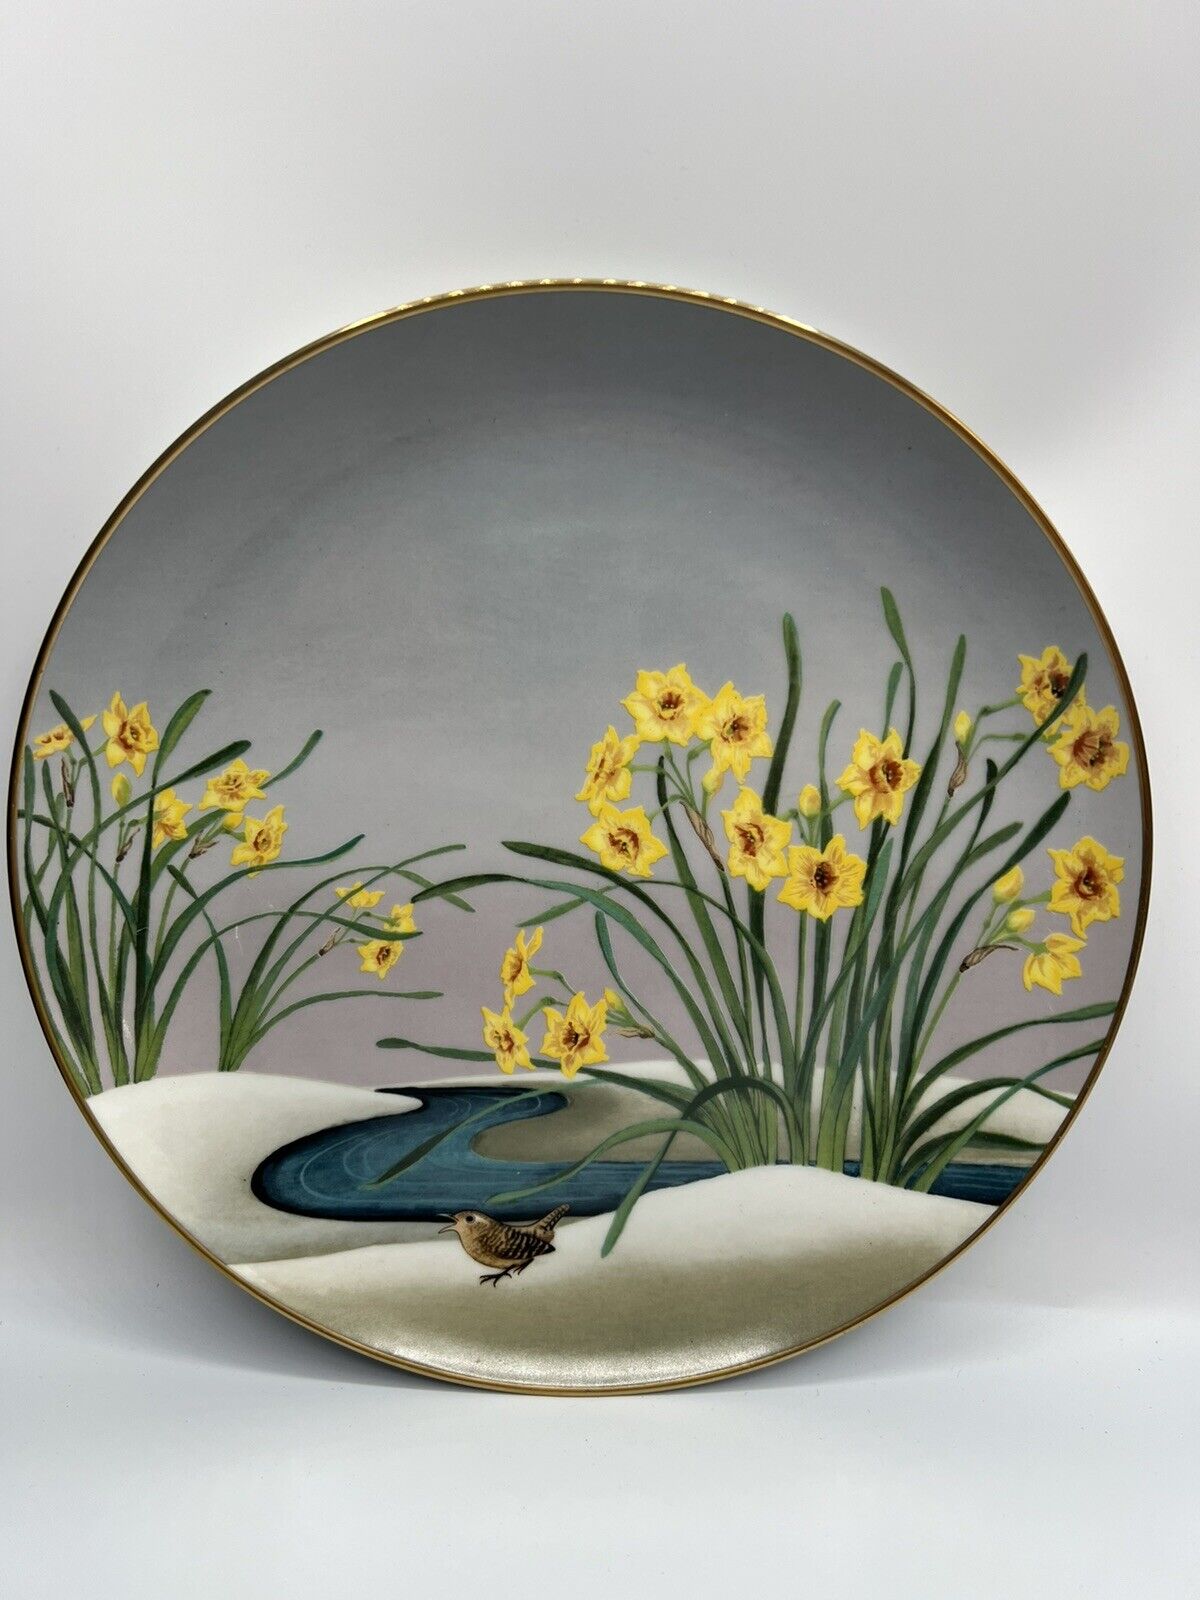 VINTAGE FRANKLIN MINT PLATE BIRDS AND FLOWERS OF THE ORIENT 70s JAPAN 10”